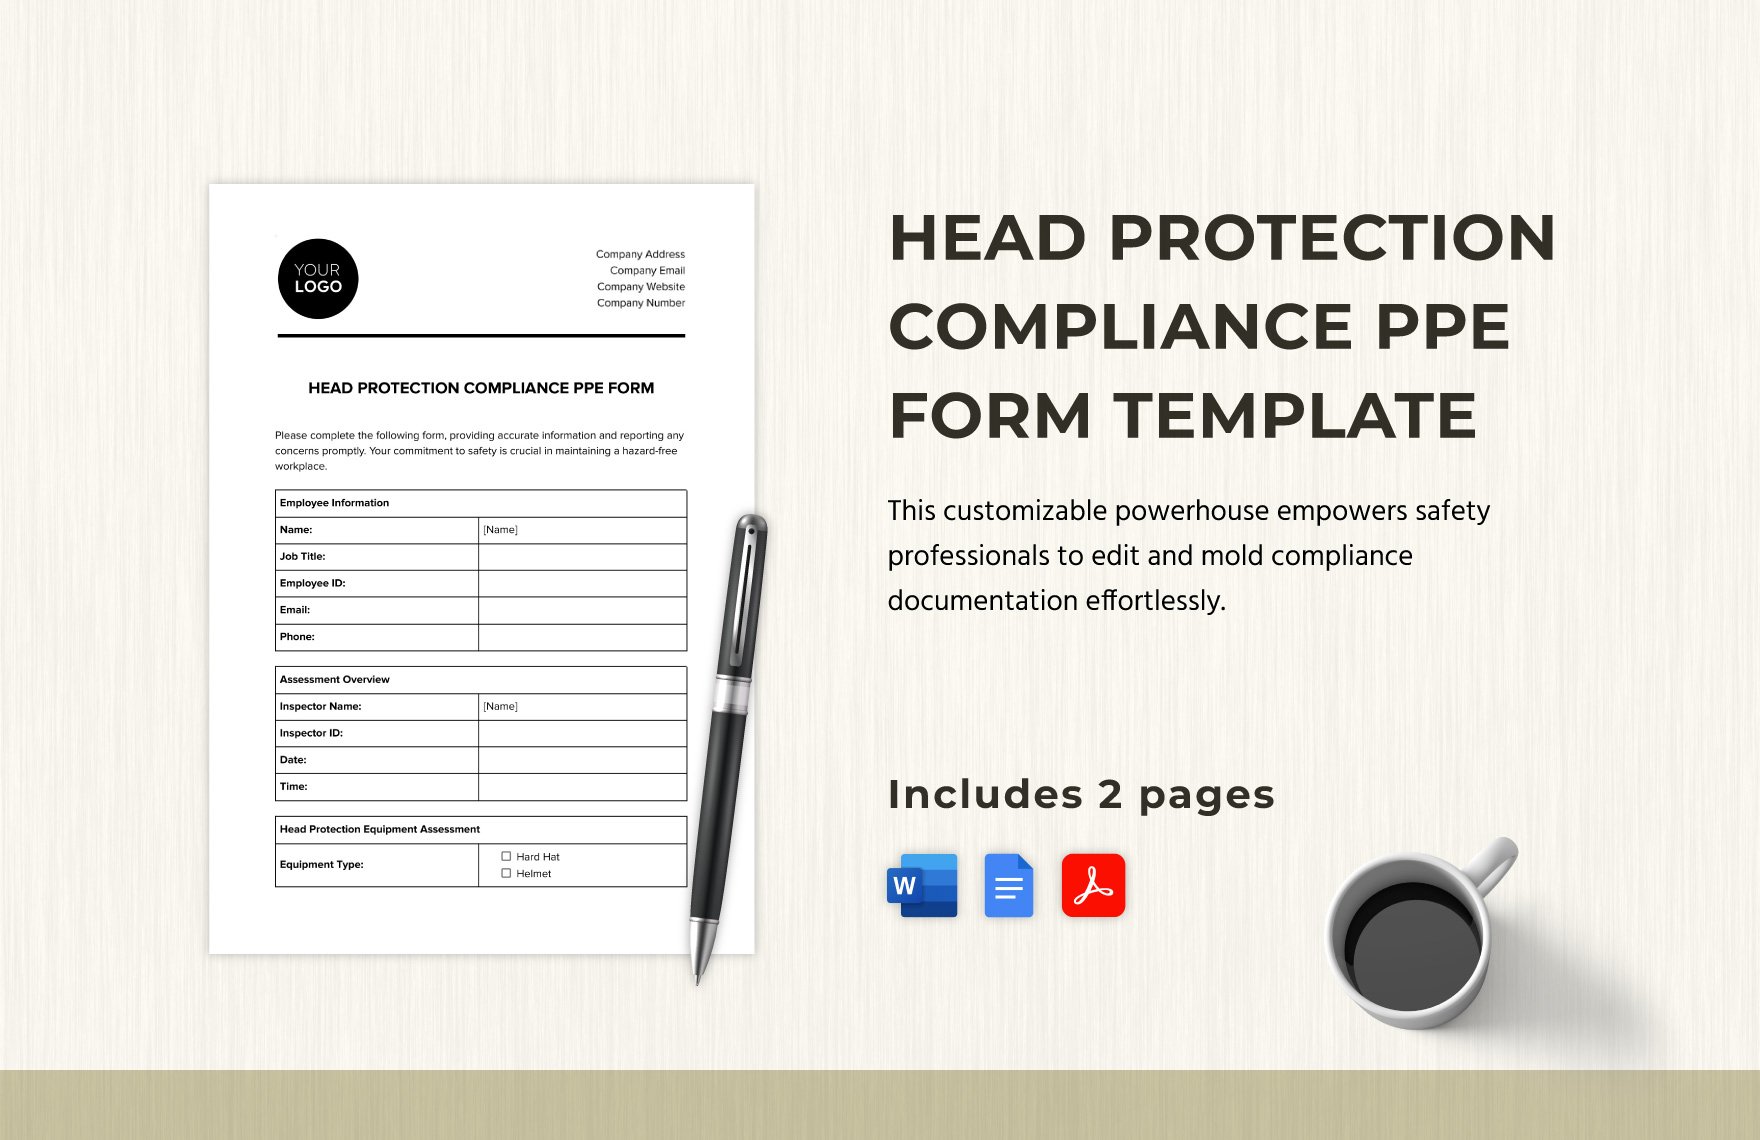 Head Protection Compliance PPE Form Template